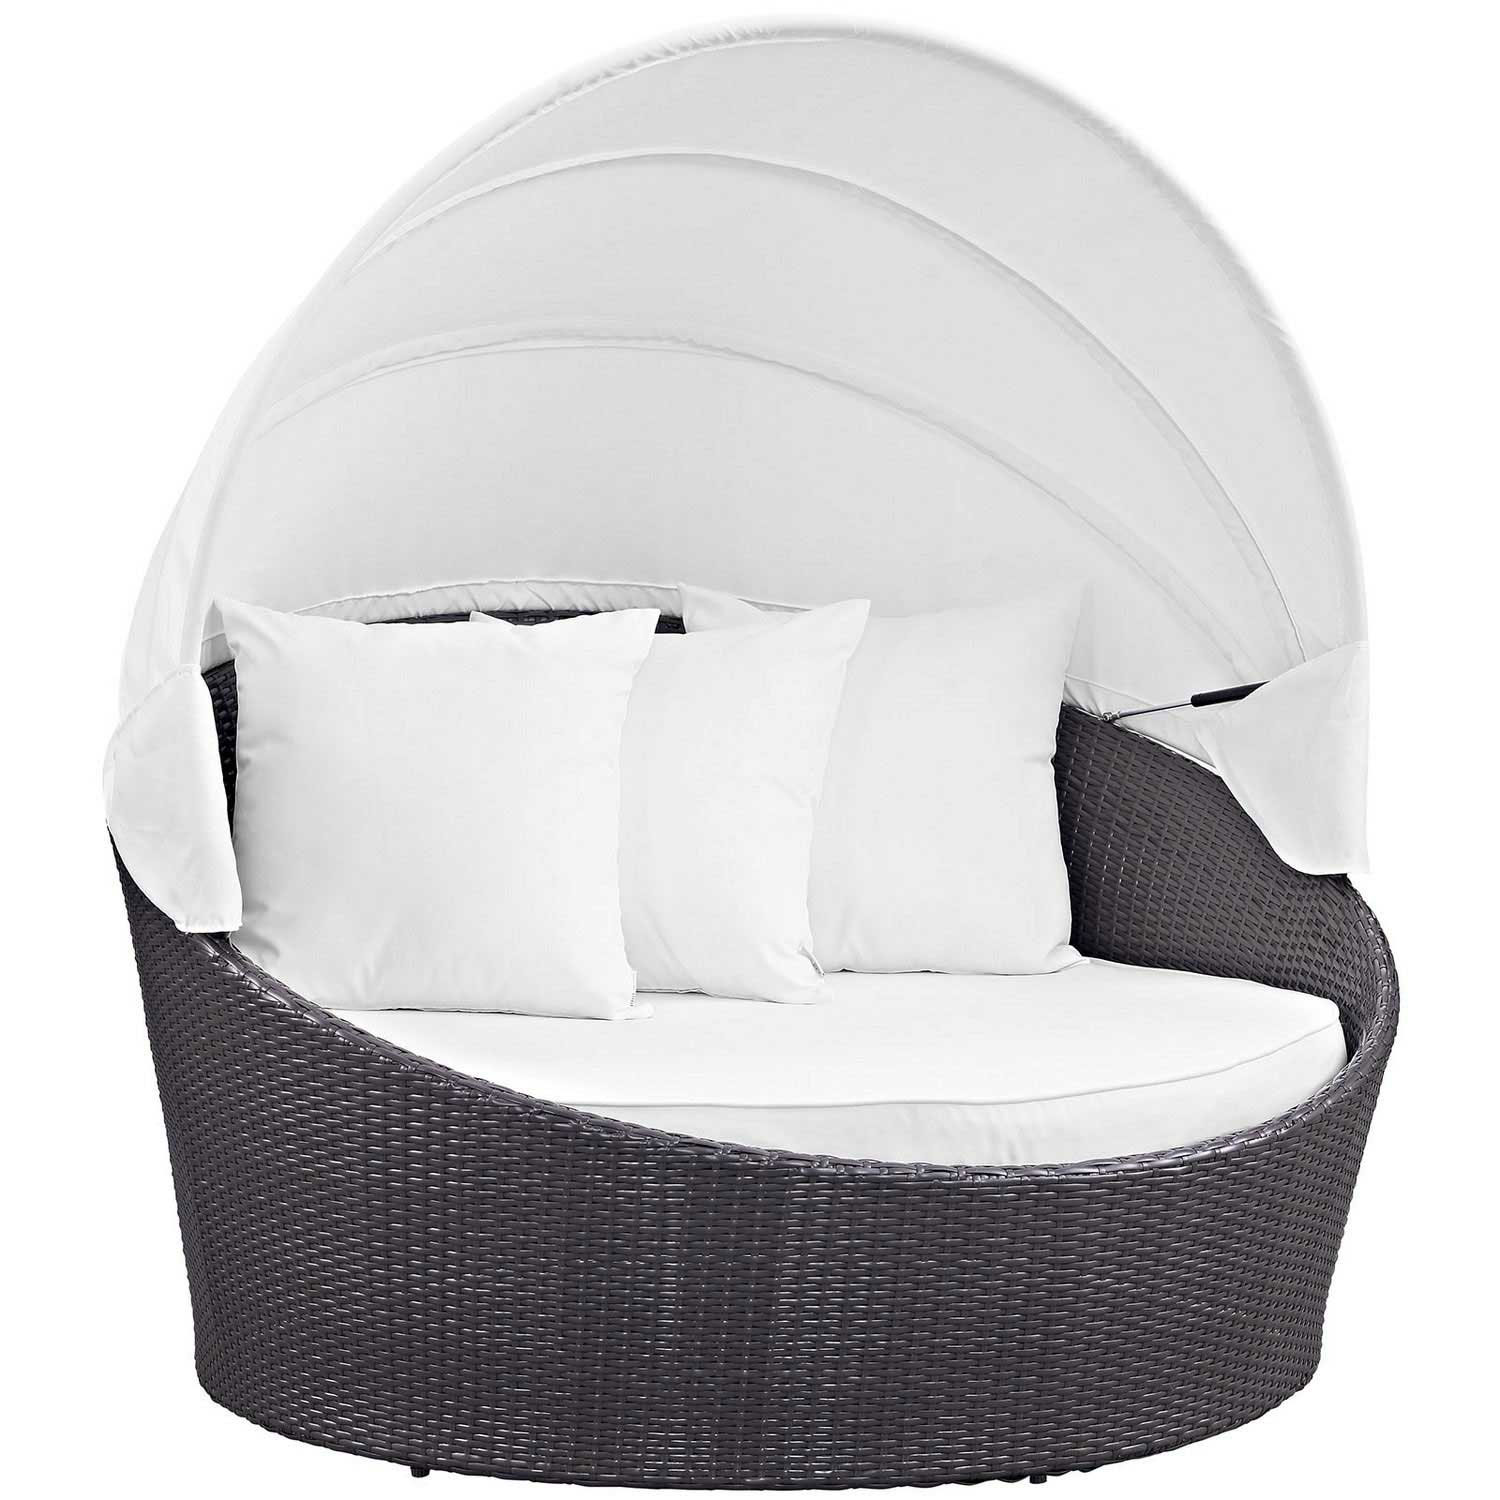 Modway Convene Canopy Outdoor Patio Daybed - Espresso White